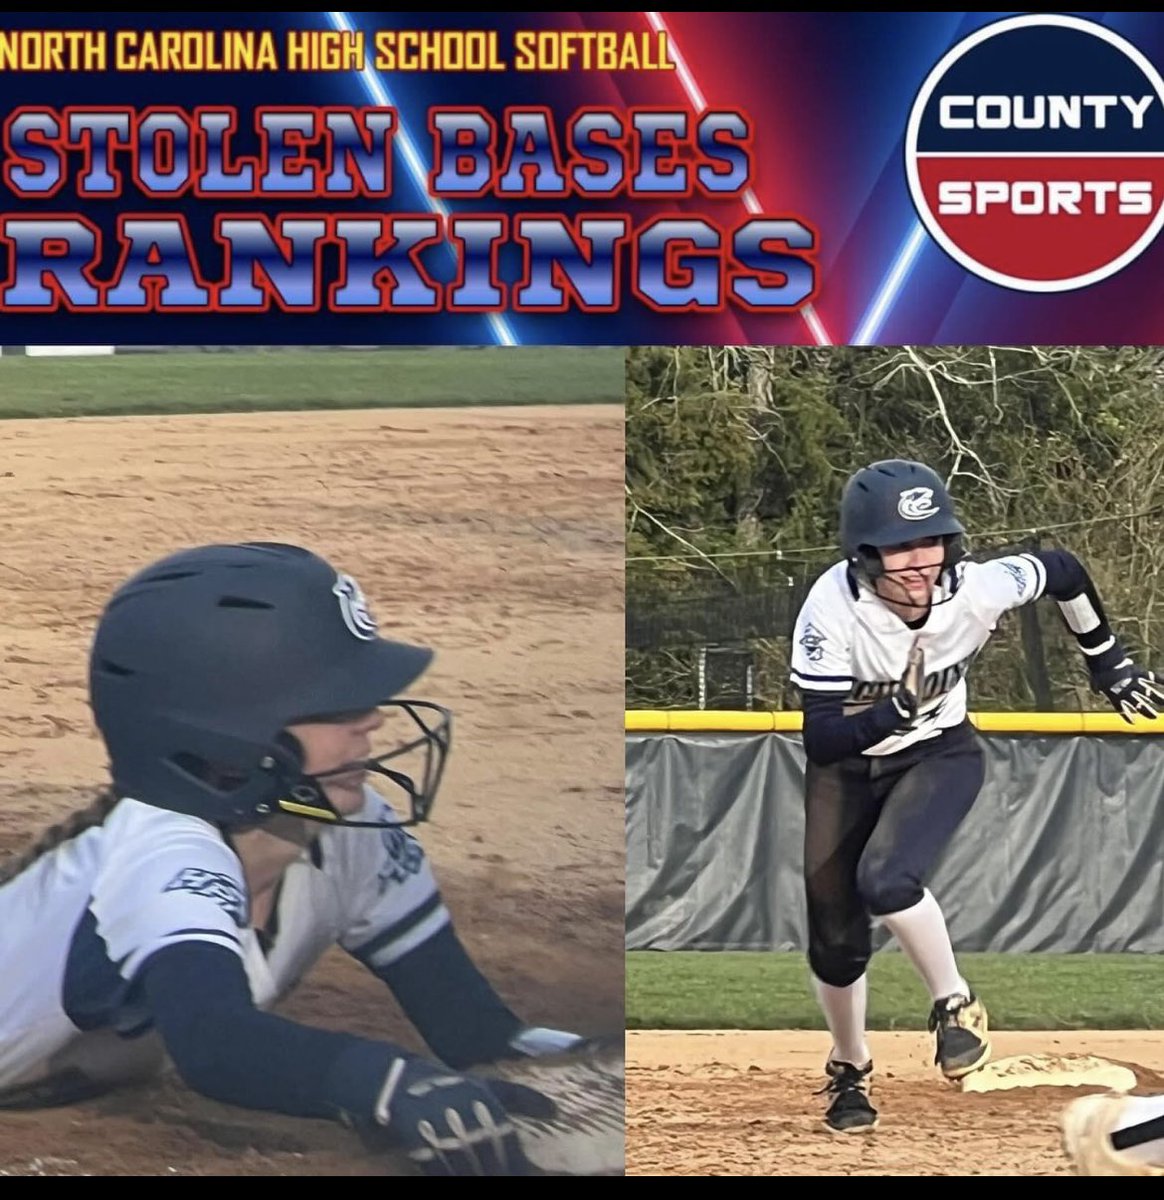 🔥🔥Cougars in the NEWS🔥🔥 
North Carolina High School 🥎Top 100 with @countysportsusa 
💪Cougars in the Top 100 Rankings … 
Power Rankings @hpca_softball 
Stolen Bases @landyn_smith6 
Cougars making some Noise!
#whateverittakes 
@hpcacougars